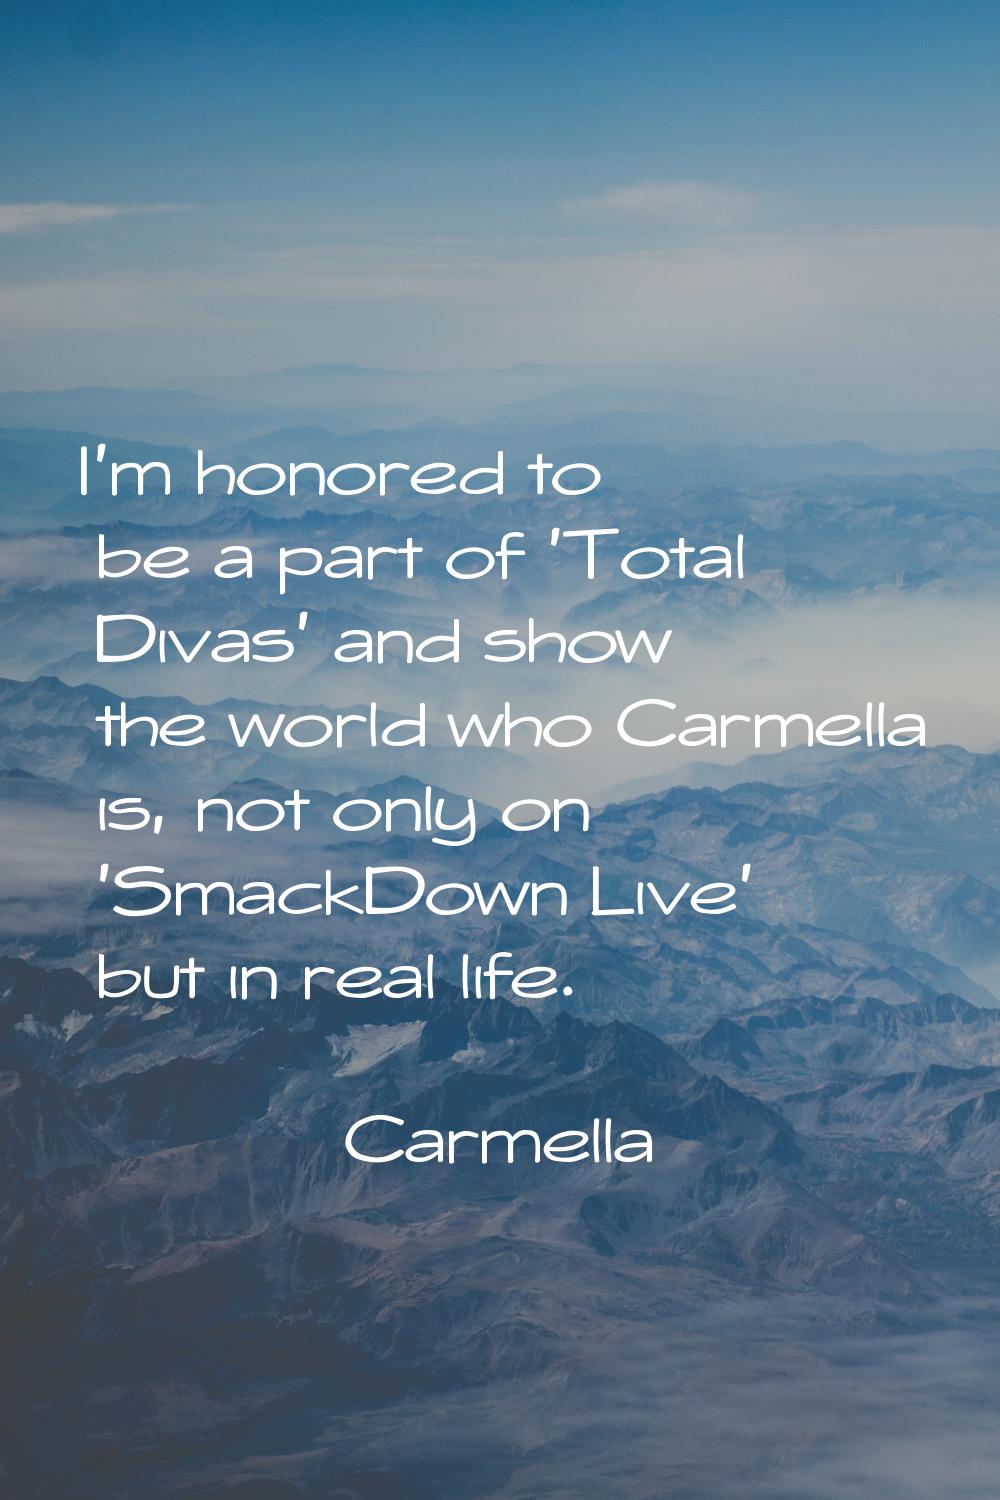 I'm honored to be a part of 'Total Divas' and show the world who Carmella is, not only on 'SmackDow